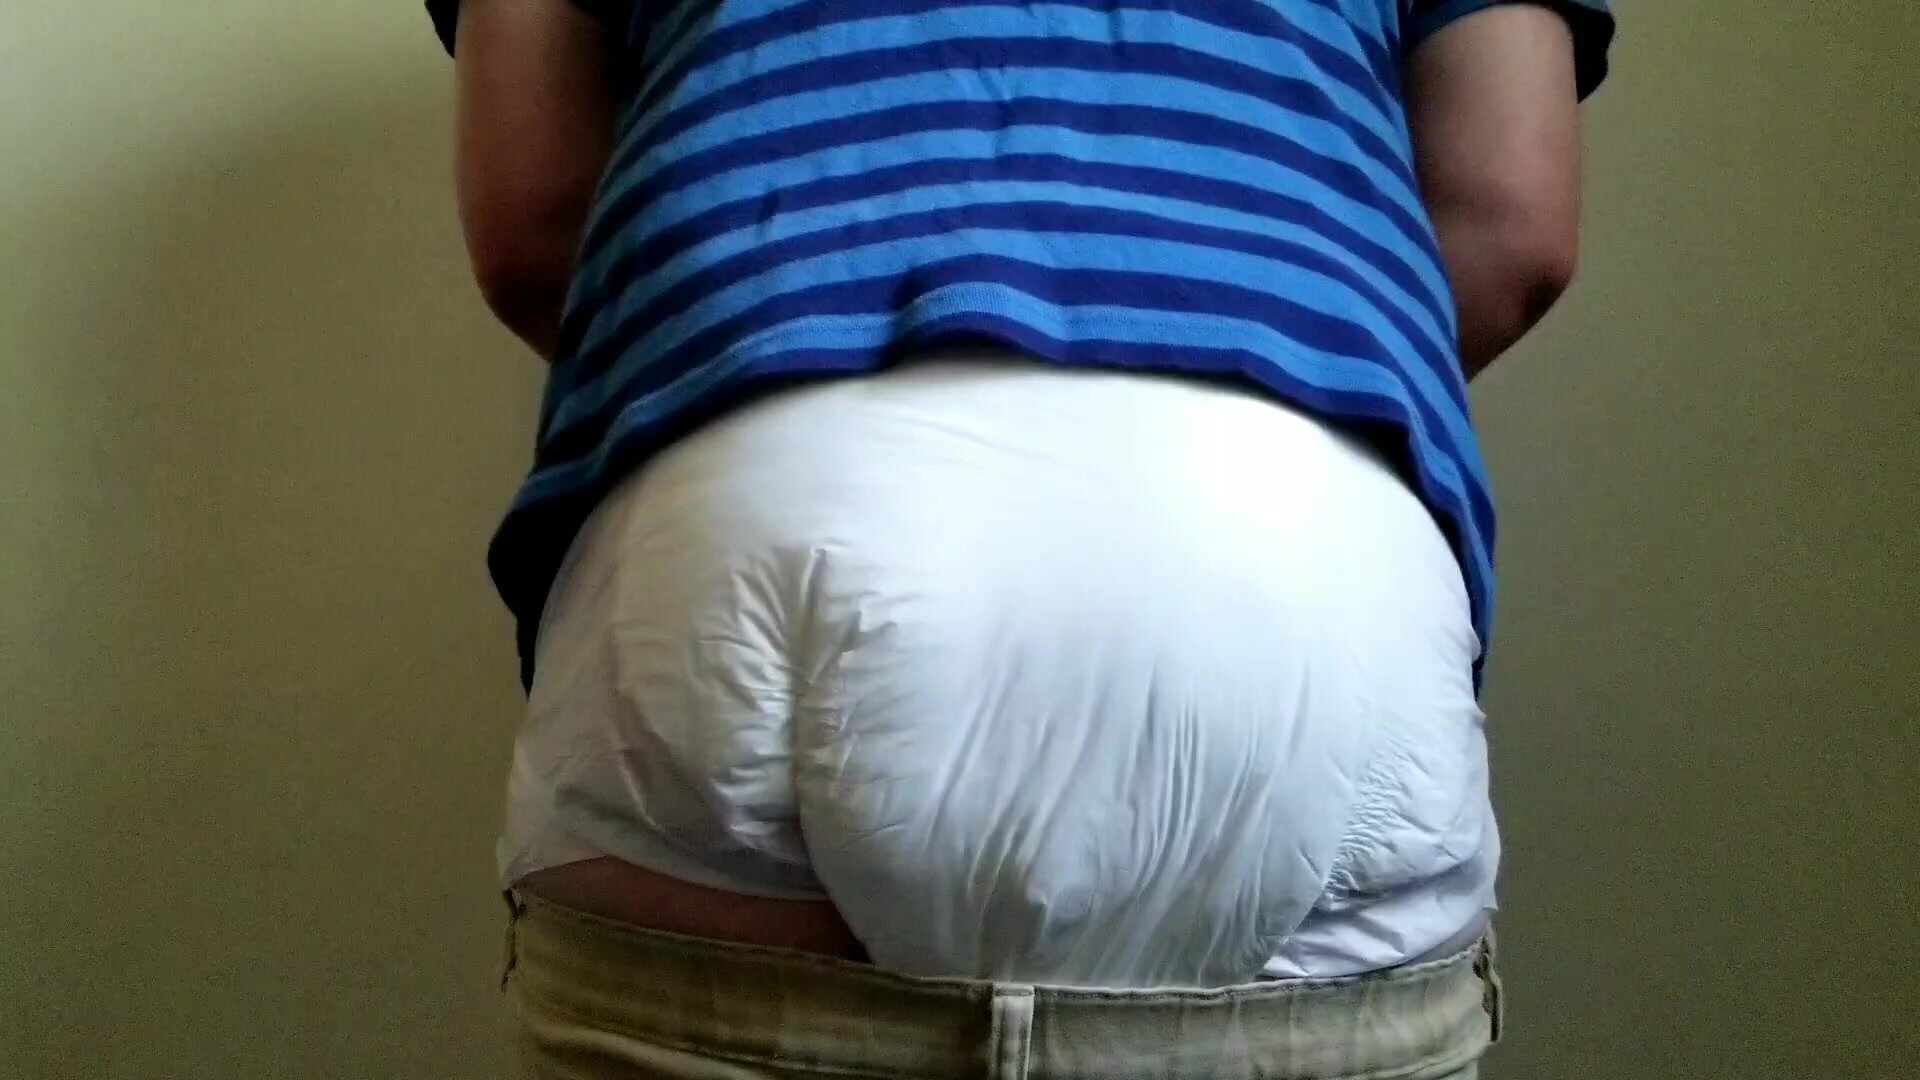 Another accident in my pants - video 2